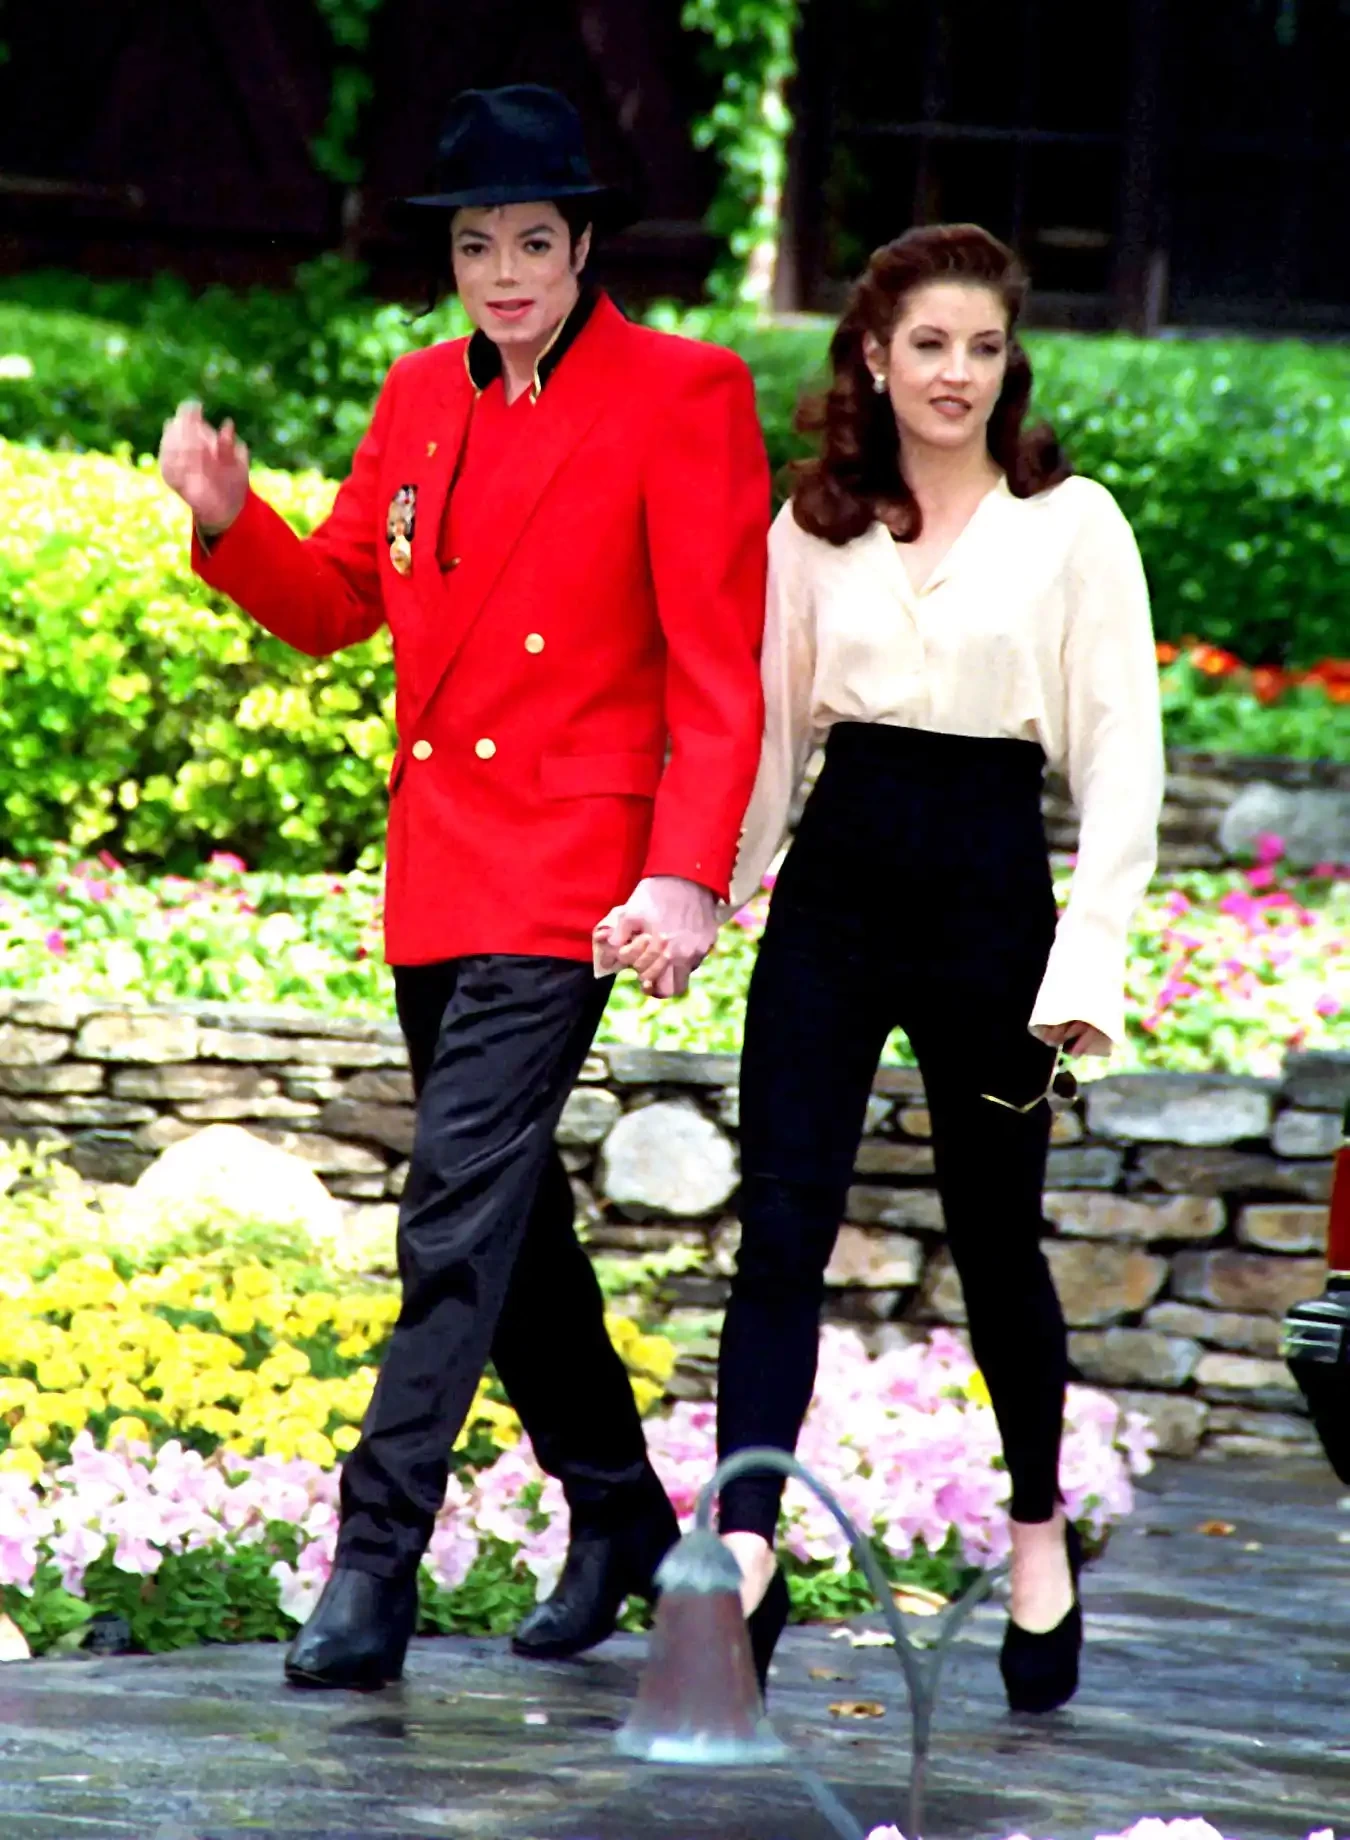 late-1993-engaged-michael-jackson-and-lisa-marie-presley-a-timeline-of-their-brief-marriage.webp